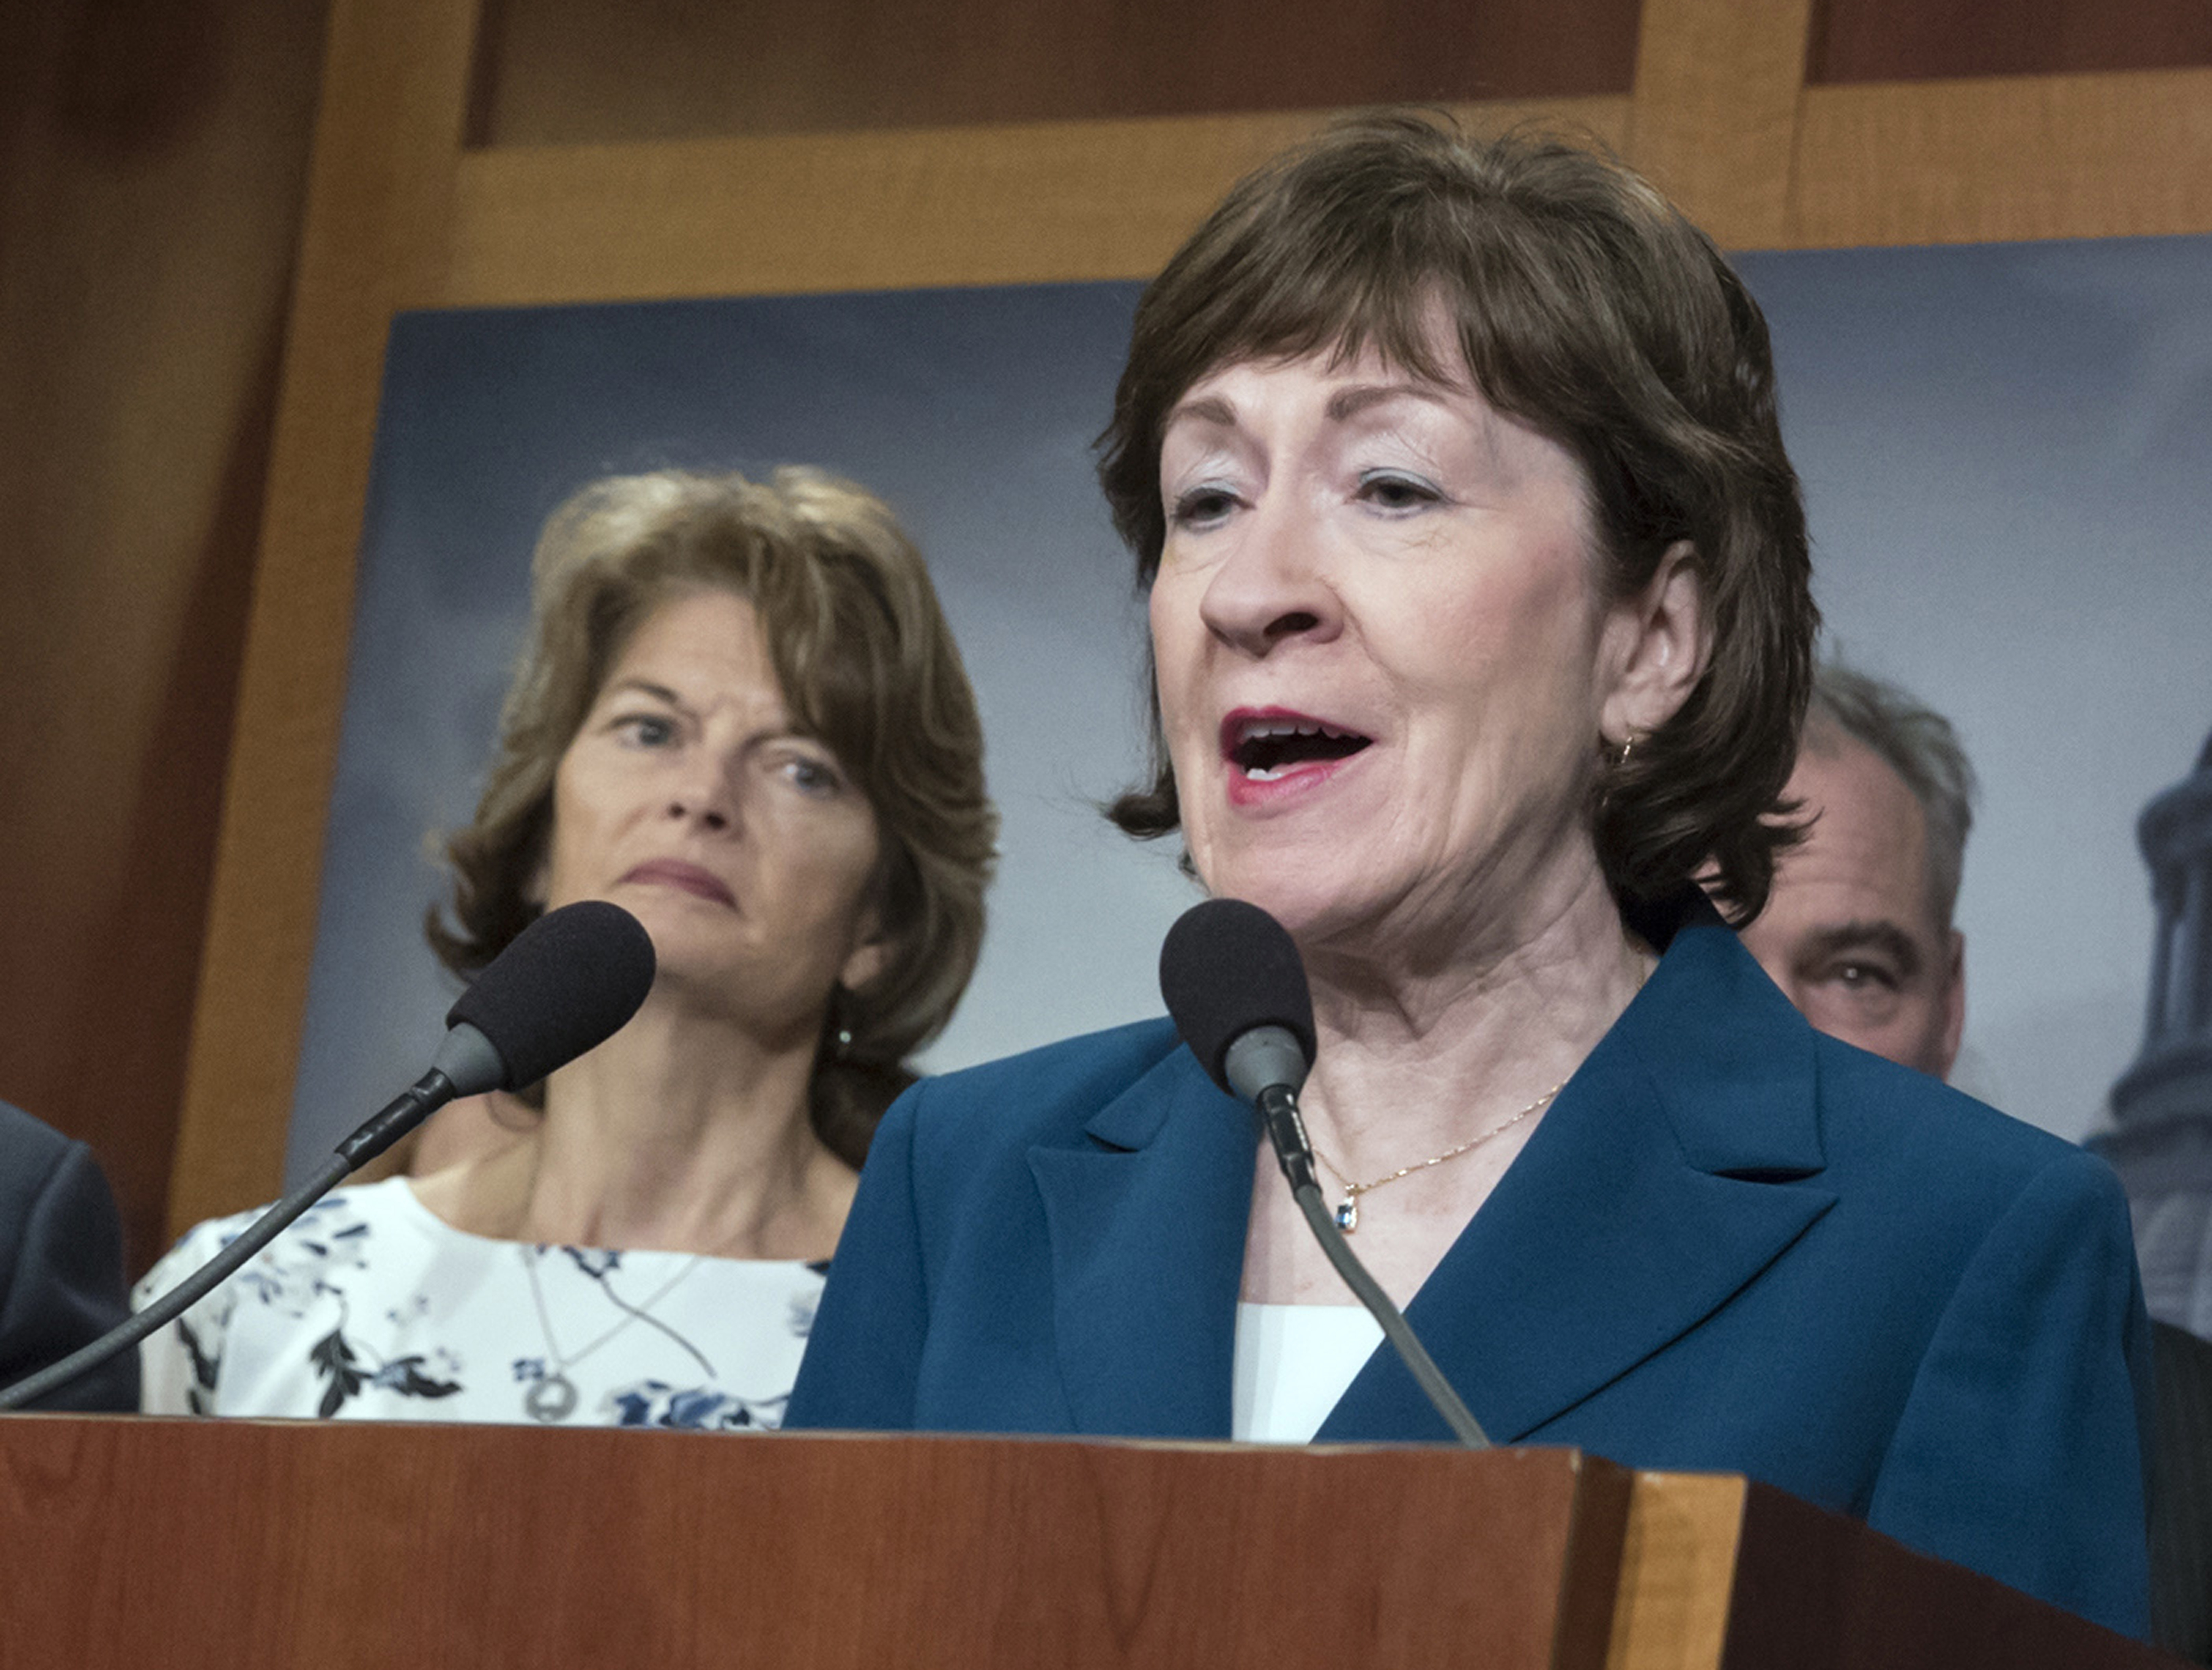 FILE - Sen. Susan Collins, R-Maine, speaks as Sen. Lisa Murkowski, R-Alaska, left, listens during a news conference, Feb. 15, 2018, at the Capitol in Washington. Several Democrats running for the Senate this year say they support overriding the filibuster, which requires a 60-vote supermajority to pass legislation, to protect reproductive rights if their party retains control of the chamber. Collins and Murkowski have introduced legislation meant to codify the protections that had been established by Roe v. Wade. (AP Photo/J. Scott Applewhite, File)